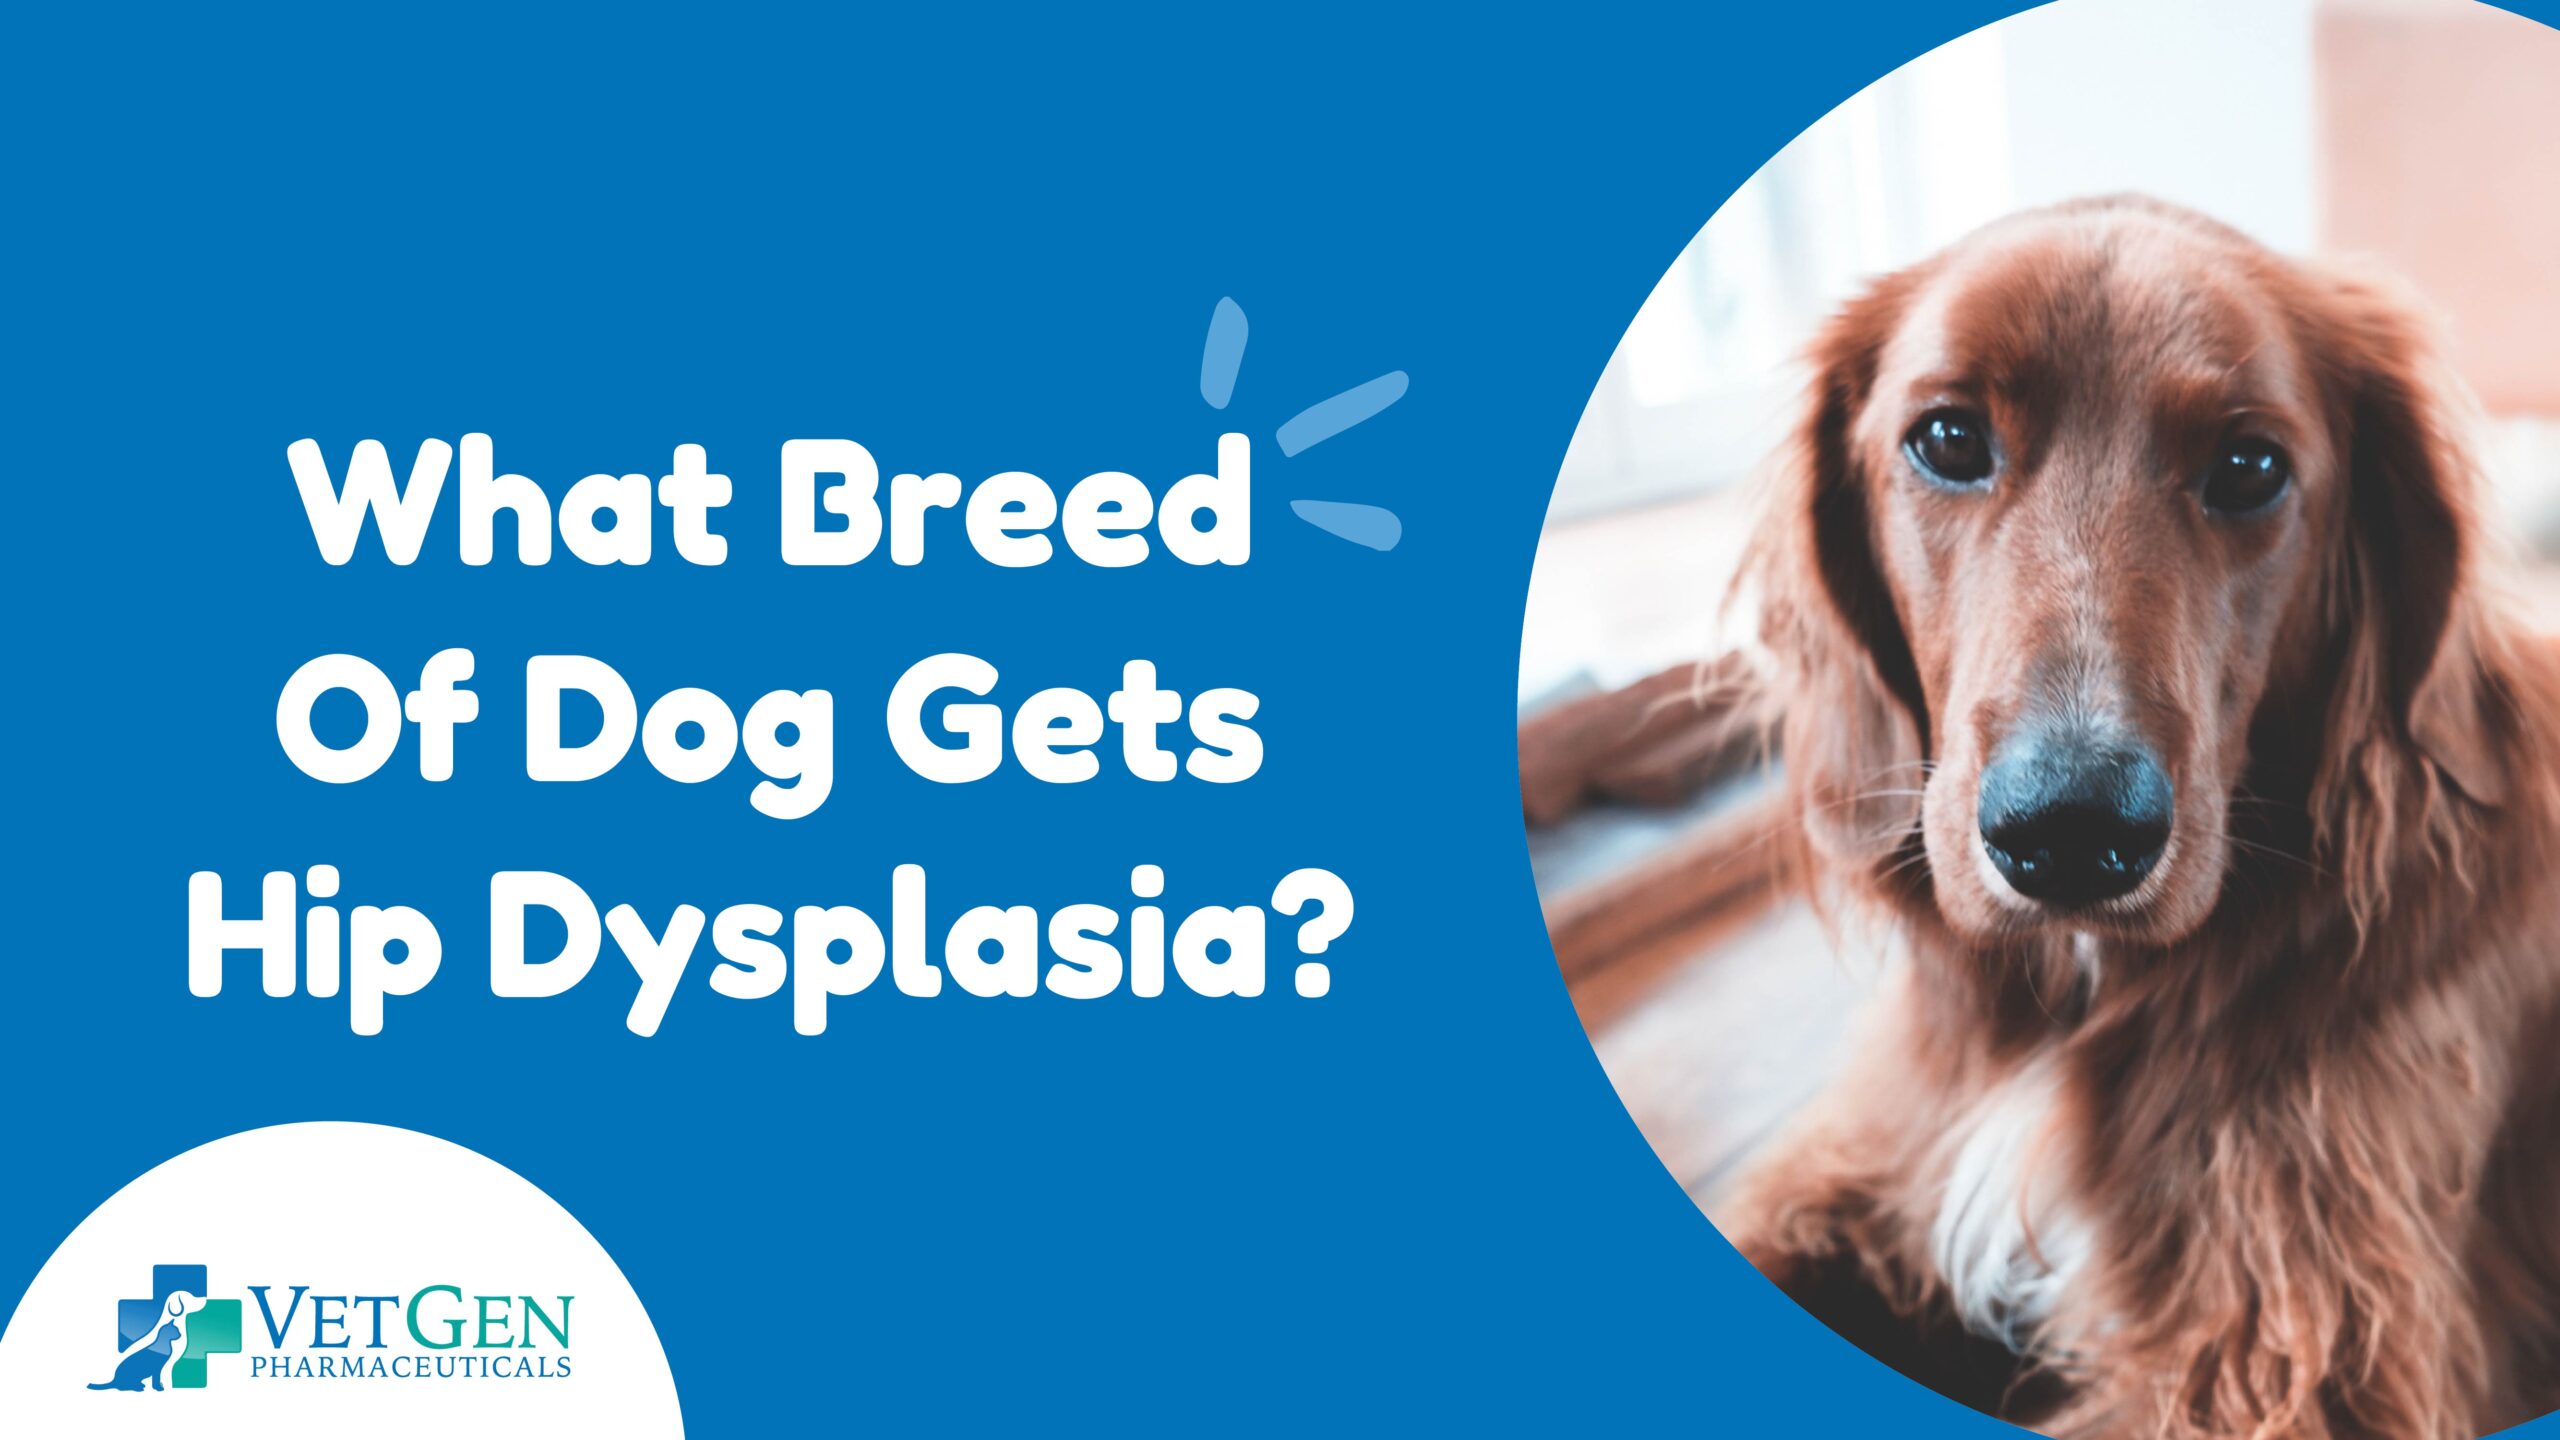 What Breed Of Dog Gets Hip Dysplasia?